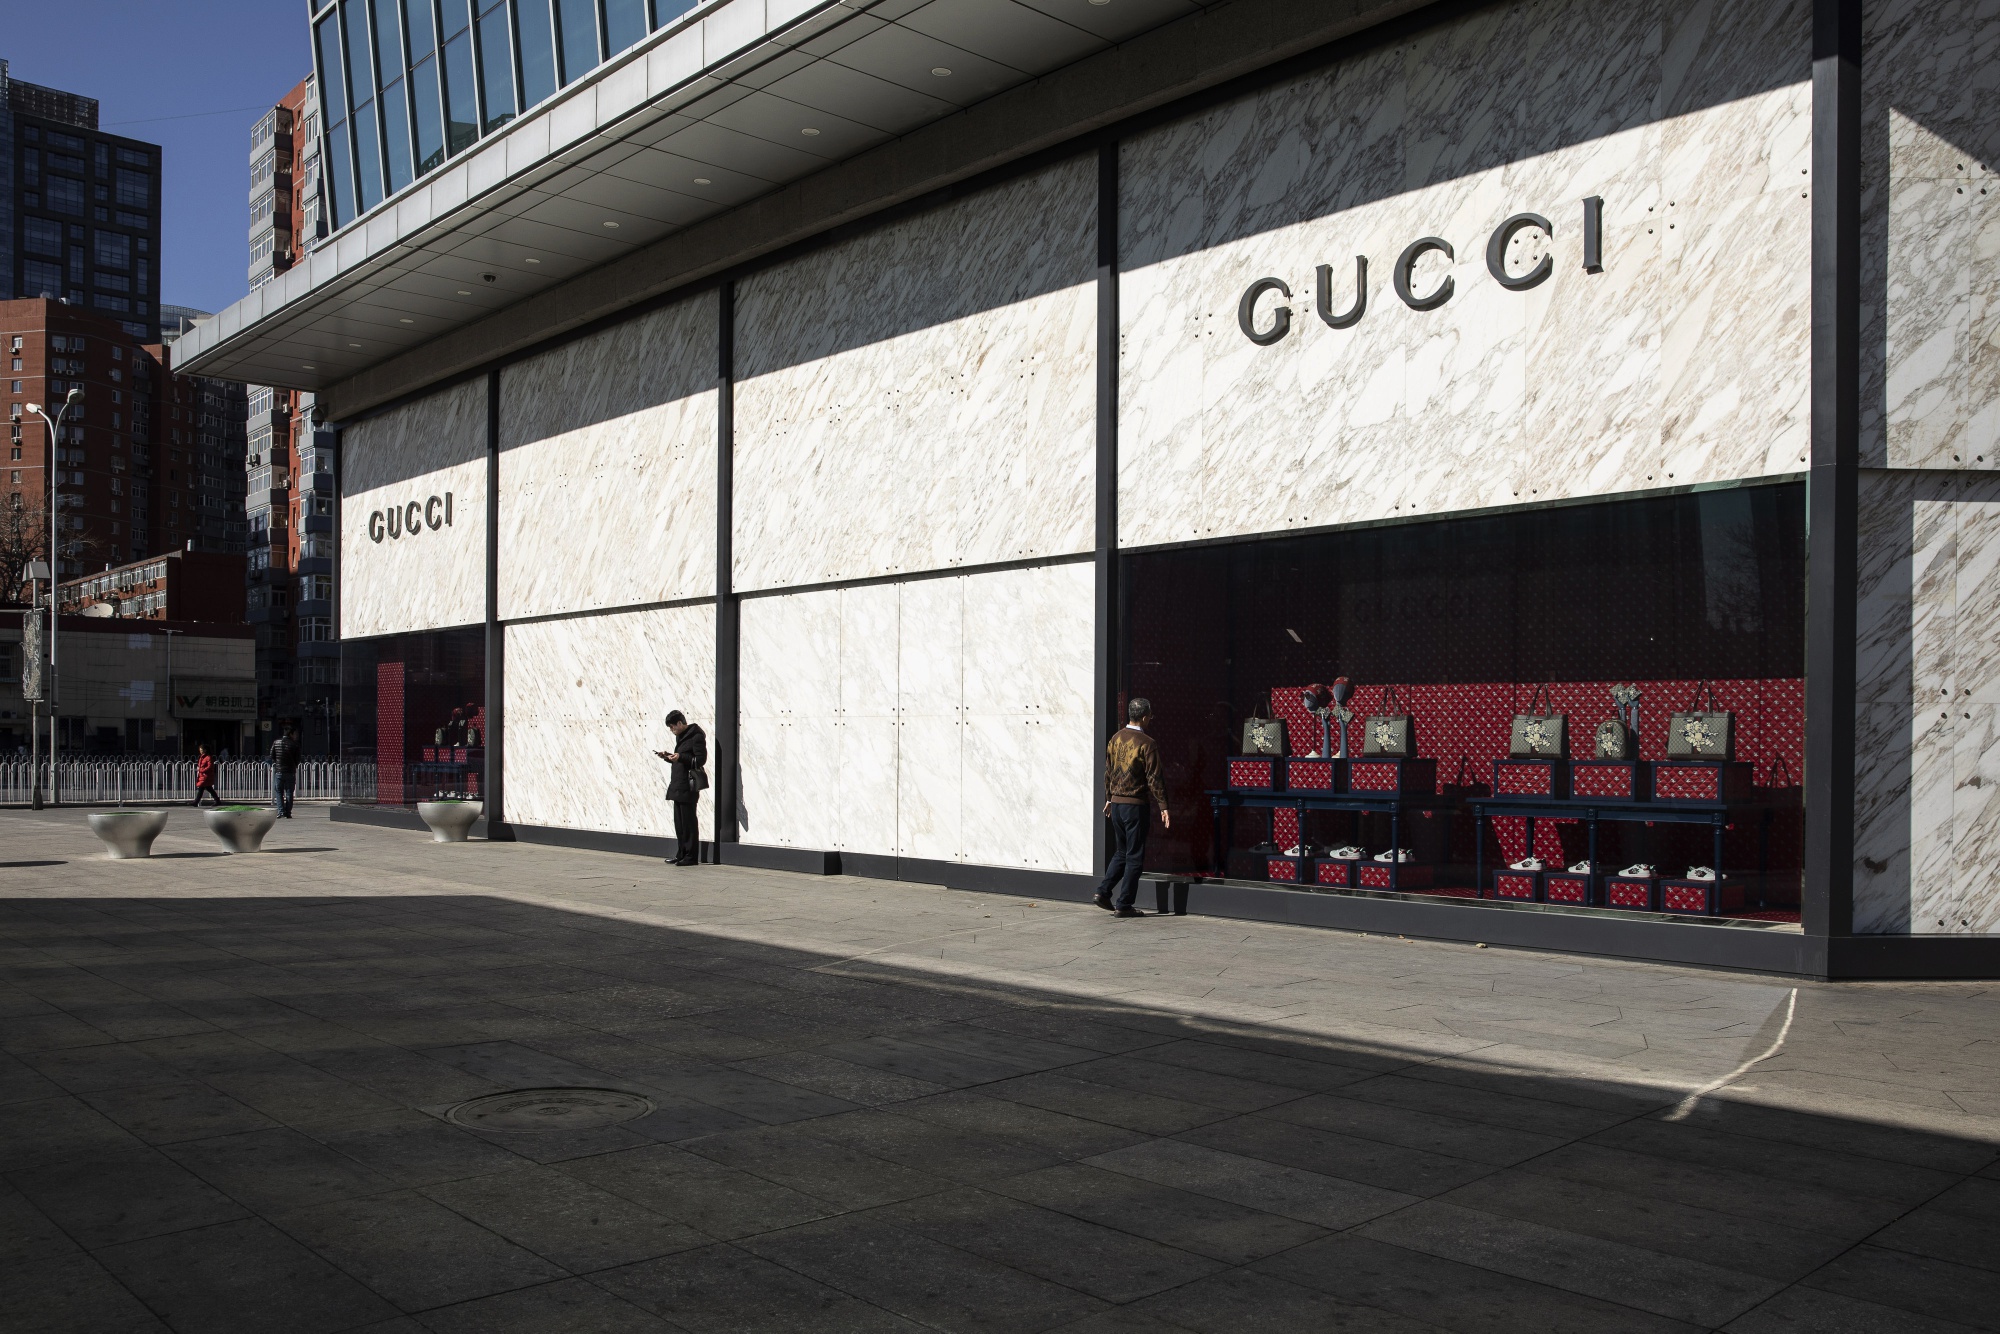 Gucci in China: What can Brands Learn from Gucci's Storytelling? - Fashion  China